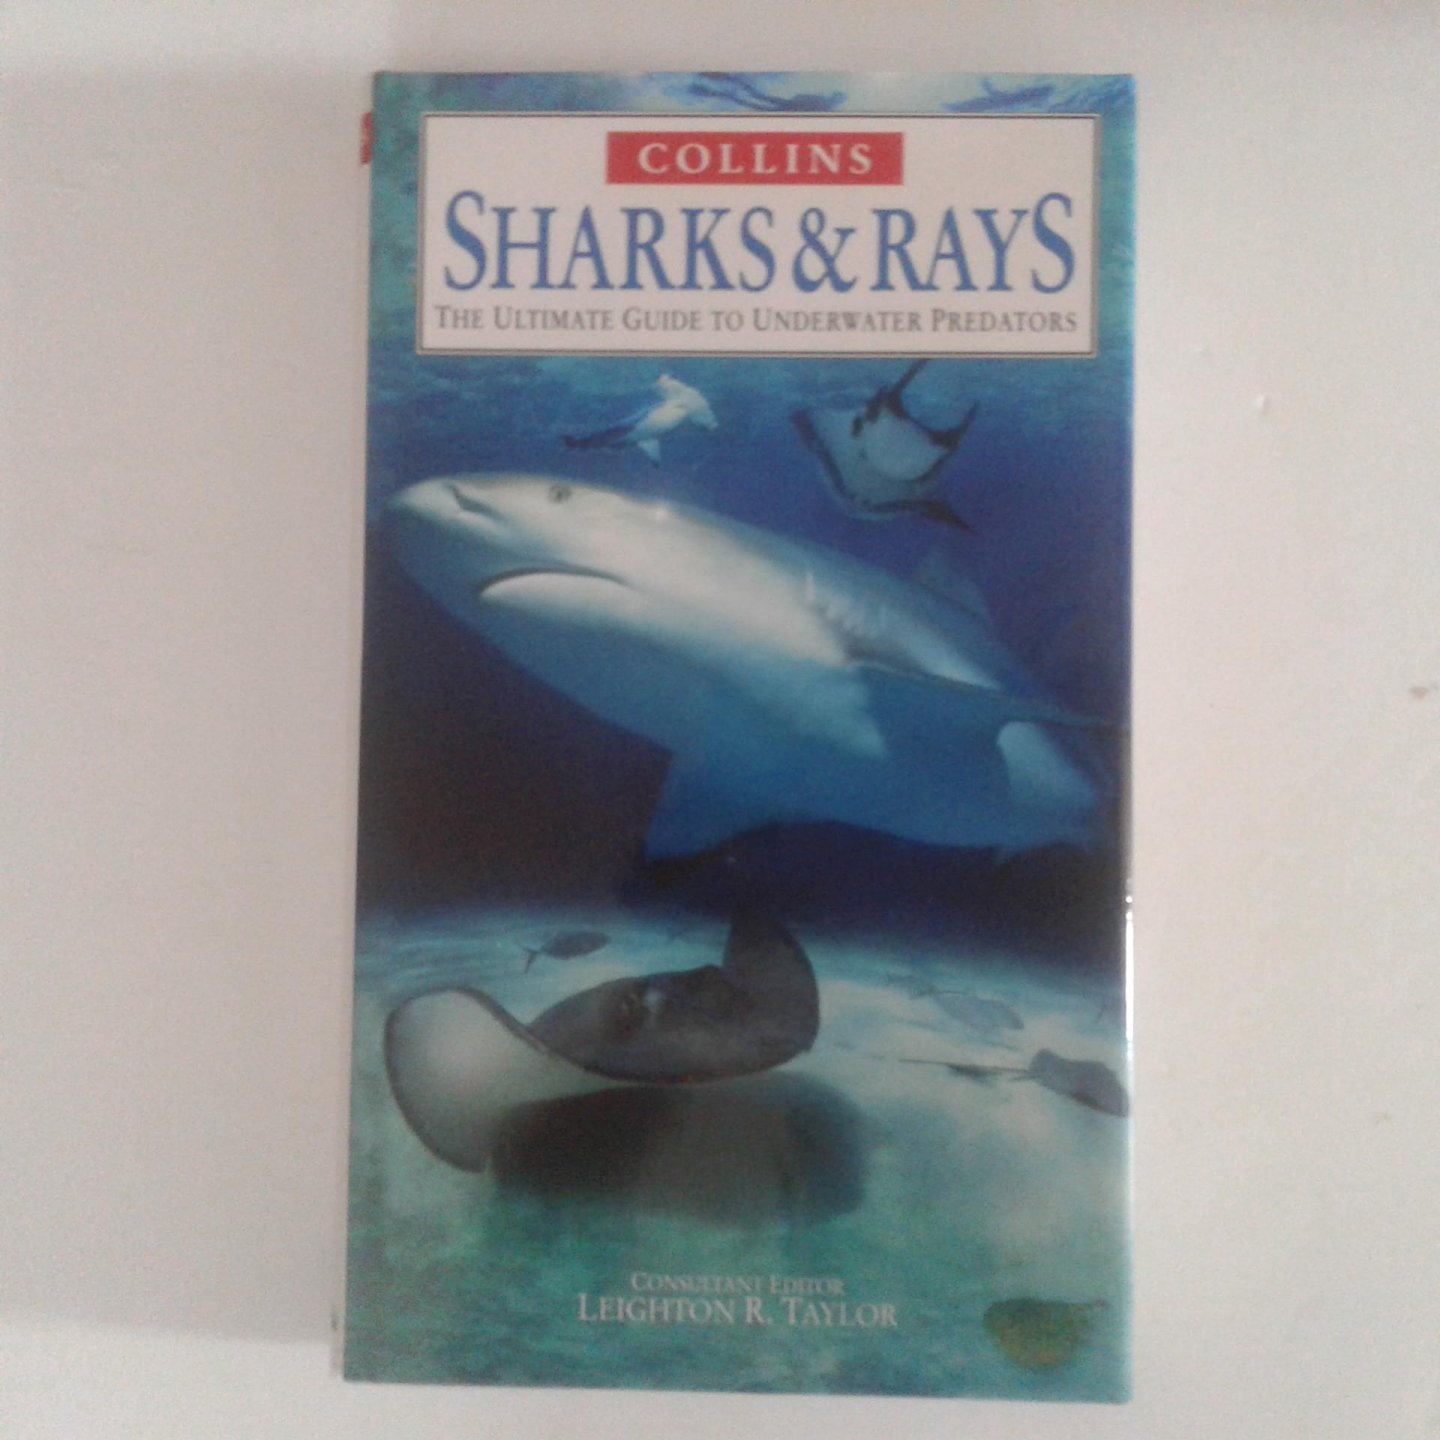 Taylor, Leighton R. - Sharks & Rays ; The Ultimade Guide to Underwater Predators